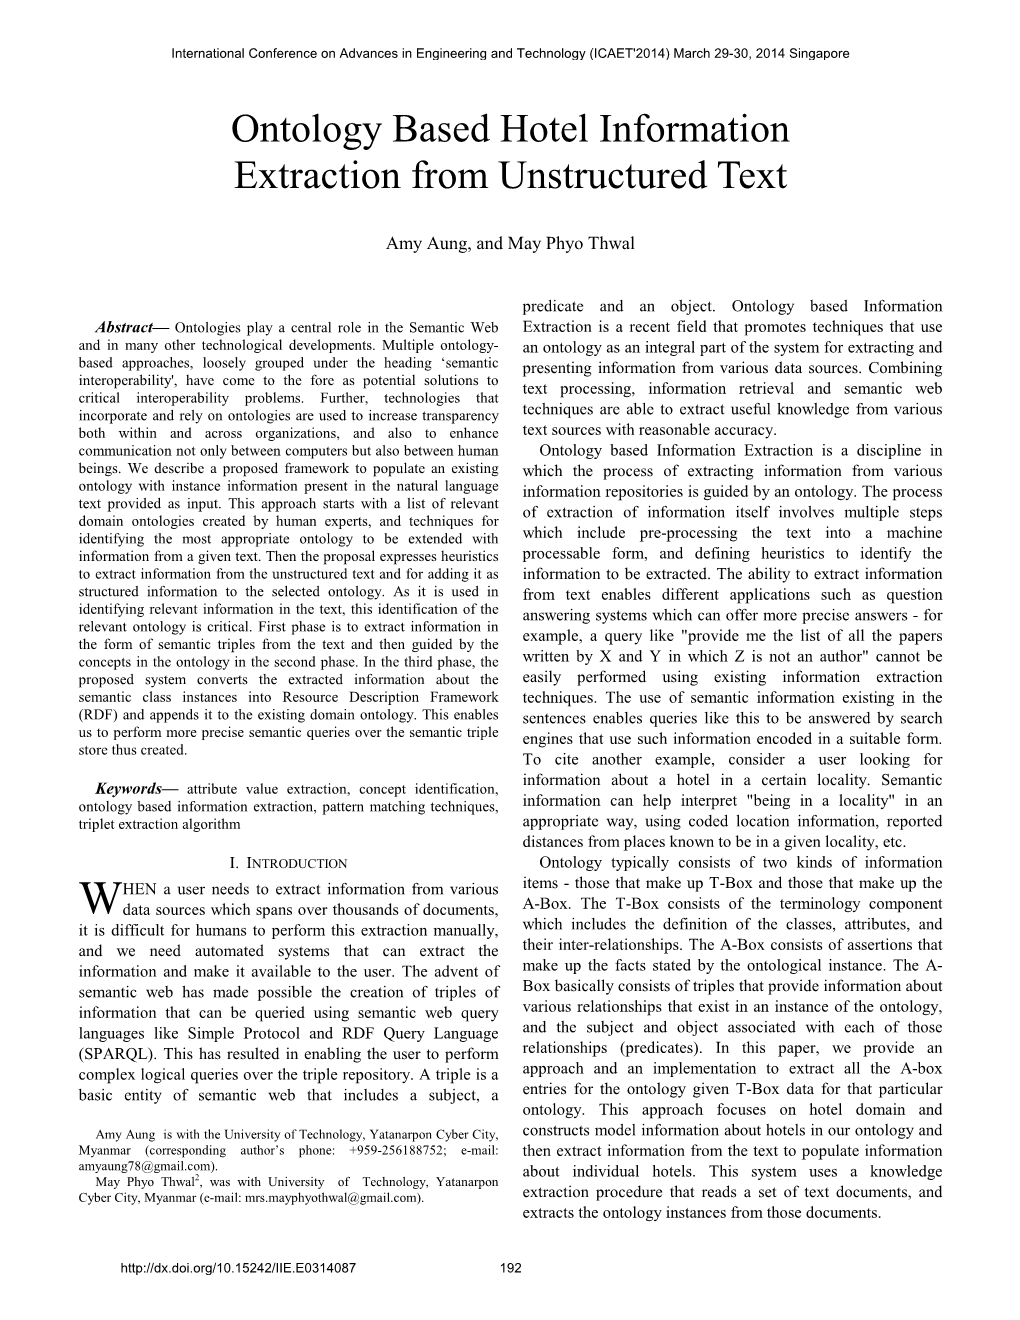 Ontology Based Hotel Information Extraction from Unstructured Text